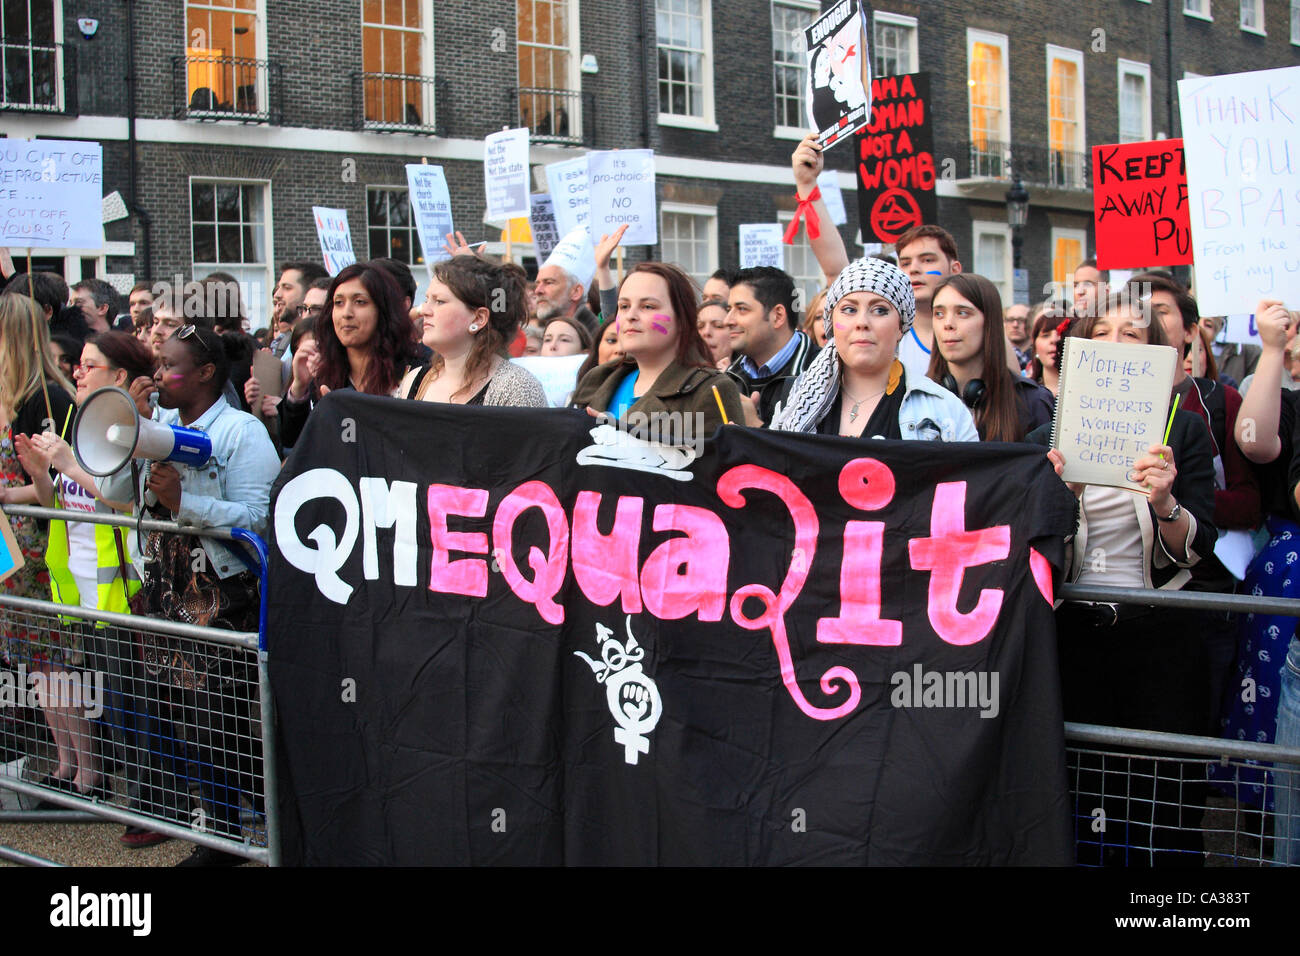 London, UK. 30 Mar, 2012. 40 Days for Life and Pro Choice Demo at Bpas abortion Clinic in London Stock Photo